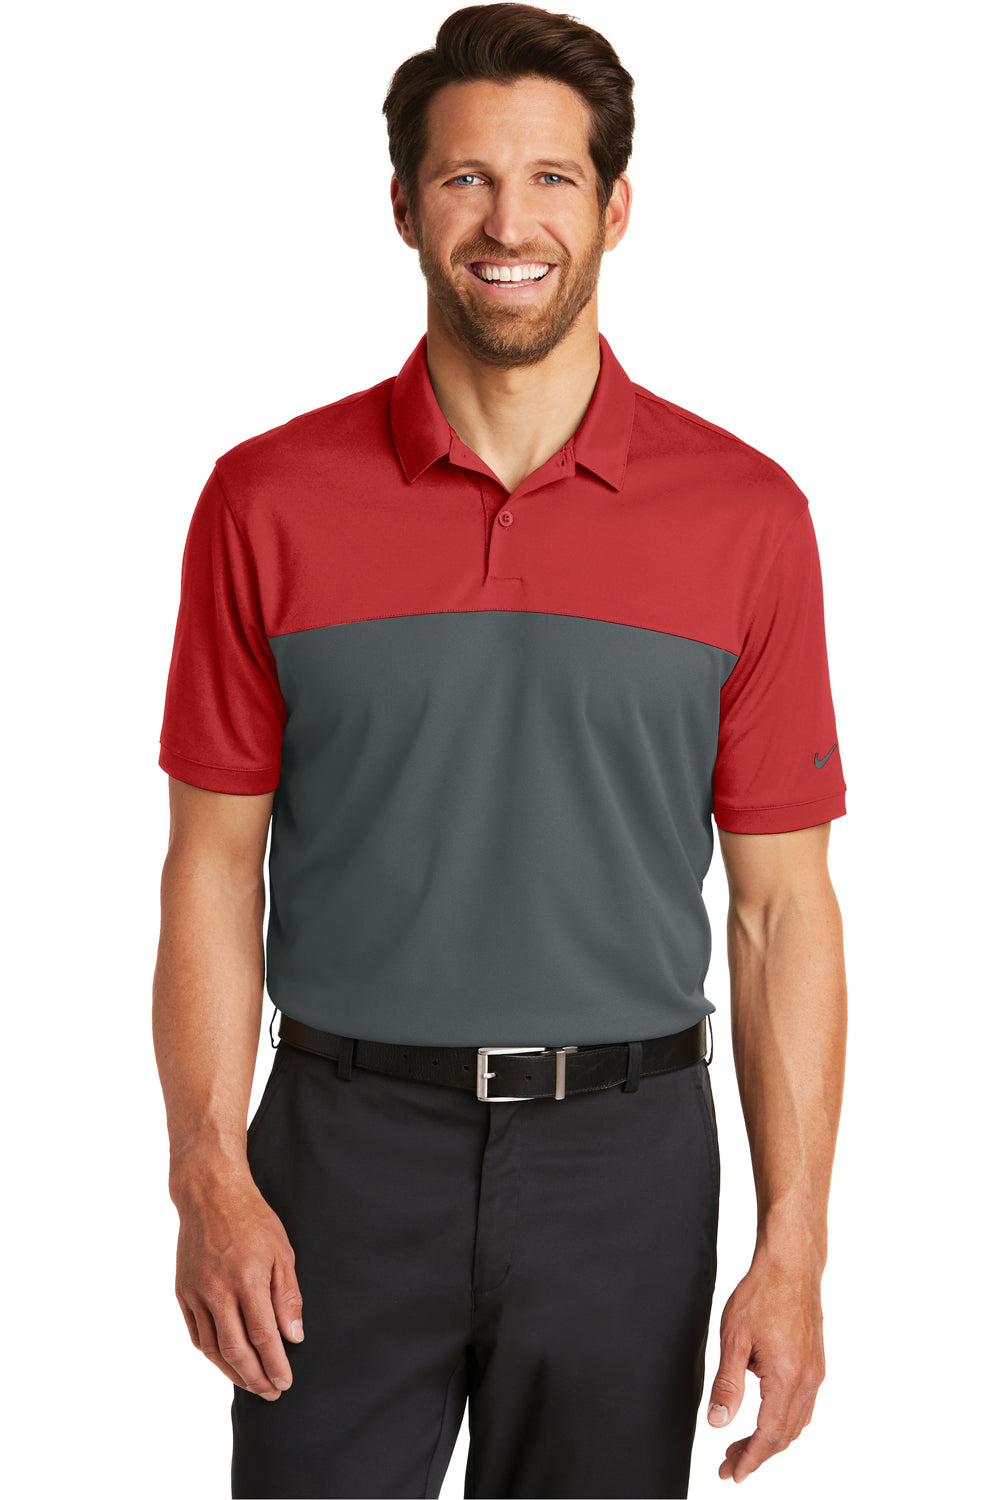 Nike 881655 Mens Dri-Fit Moisture Wicking Short Sleeve Polo Shirt Red/Anthracite Grey Front